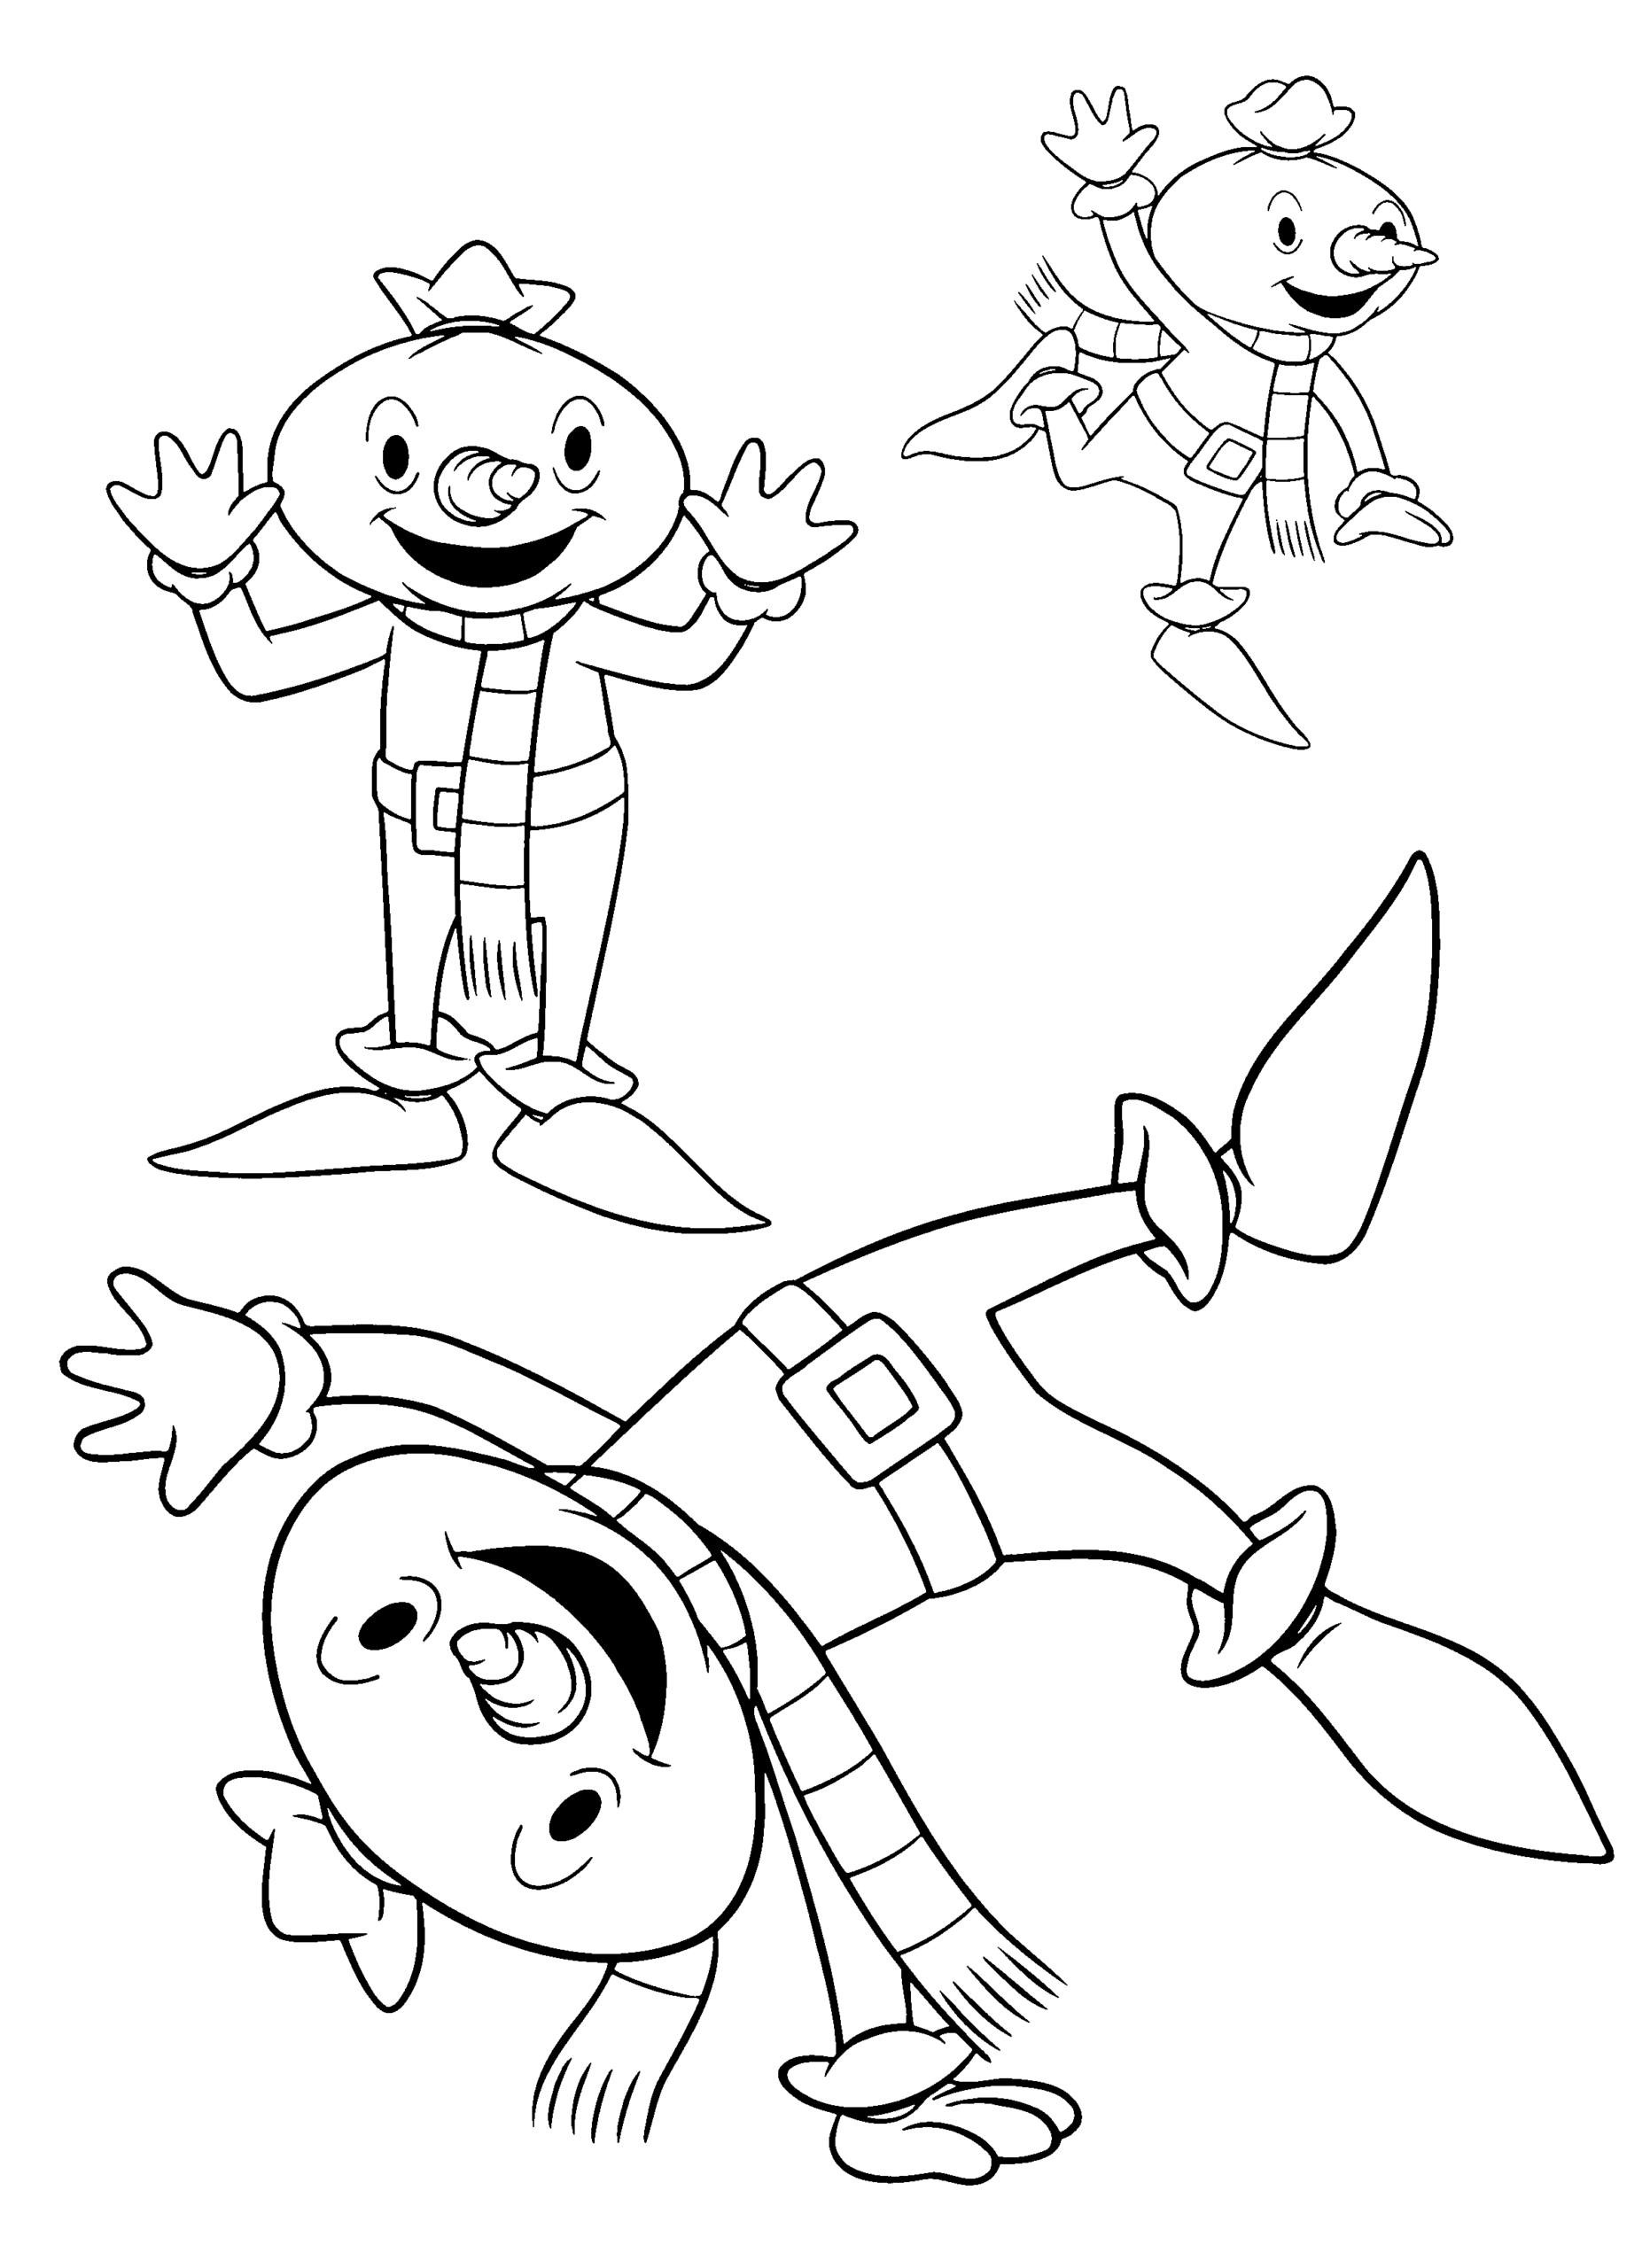 Bob the Builder Coloring Pages TV Film bob the builder 59 Printable 2020 01079 Coloring4free